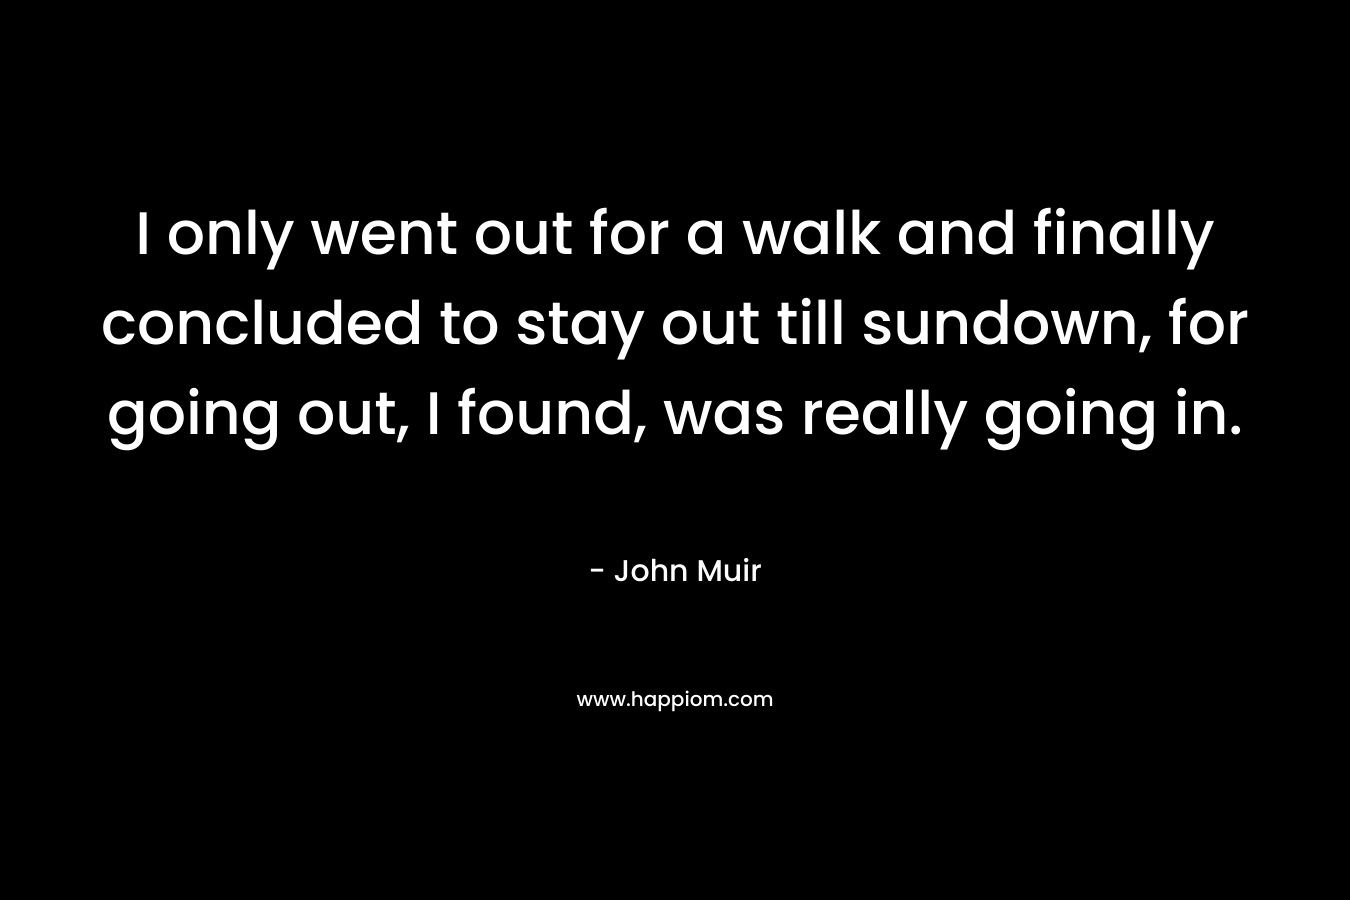 I only went out for a walk and finally concluded to stay out till sundown, for going out, I found, was really going in. – John Muir